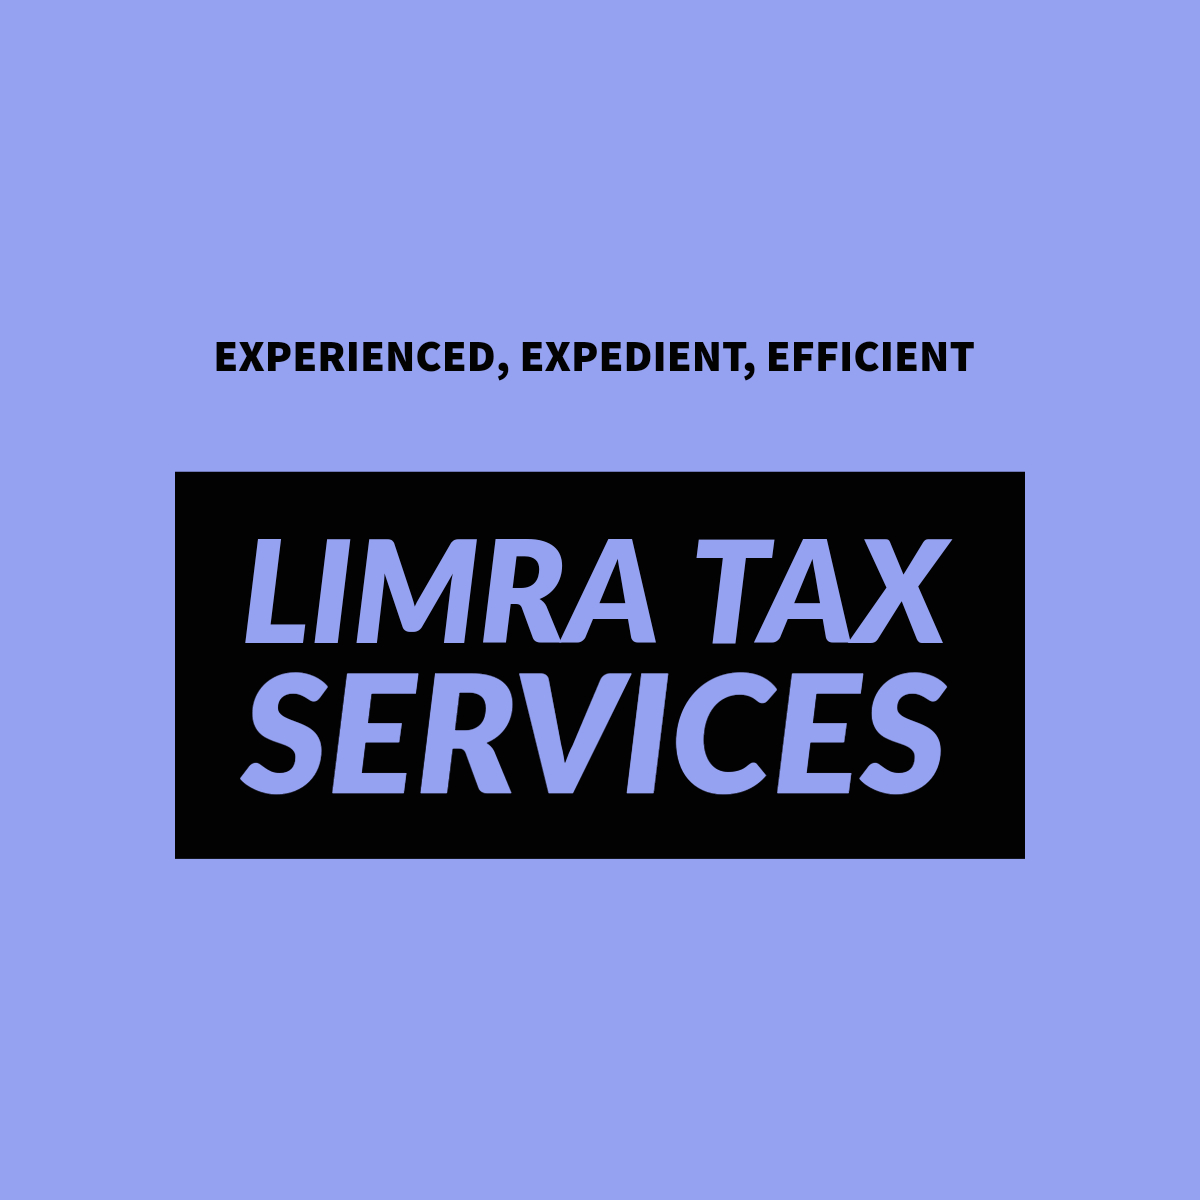 LIMRA TAX Services